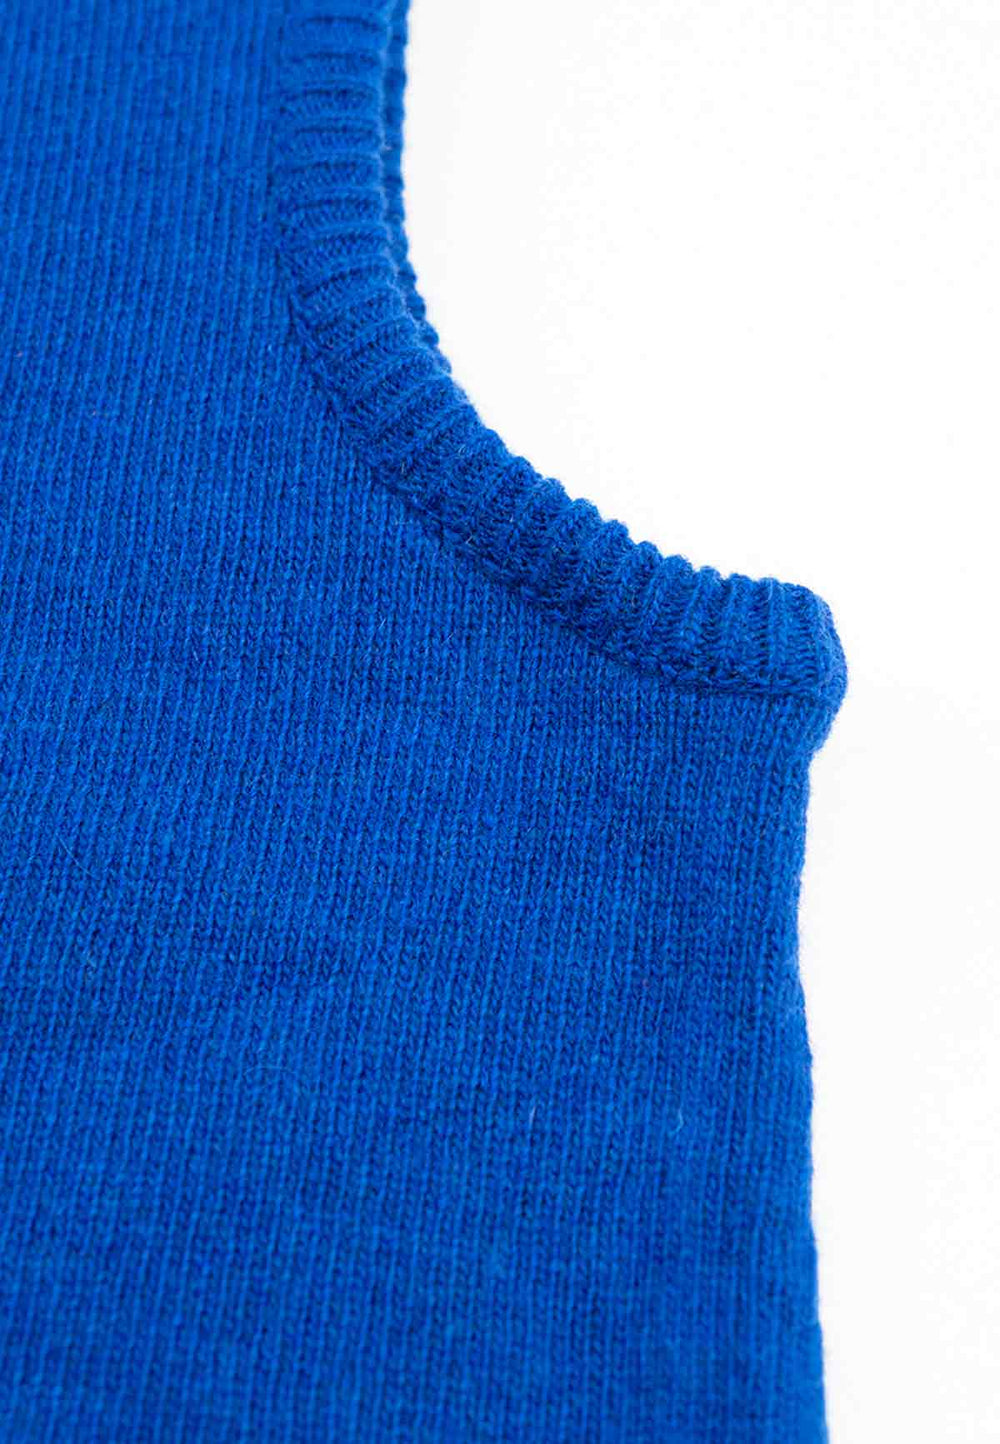 Close up of the brim of a knit hood in cobalt blue.